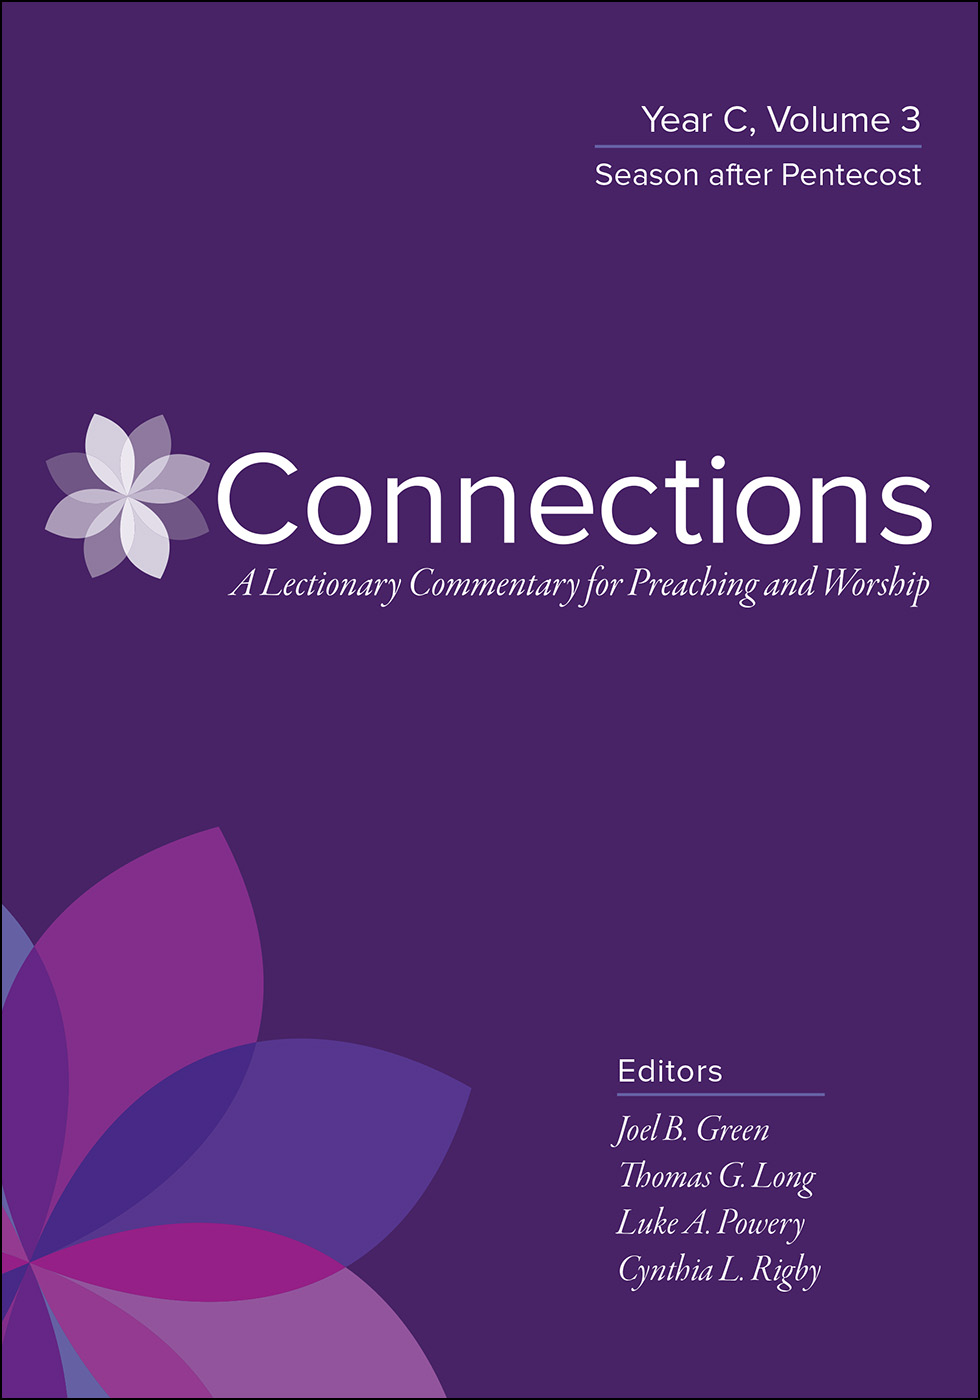 Connections: Year C, Volume 3